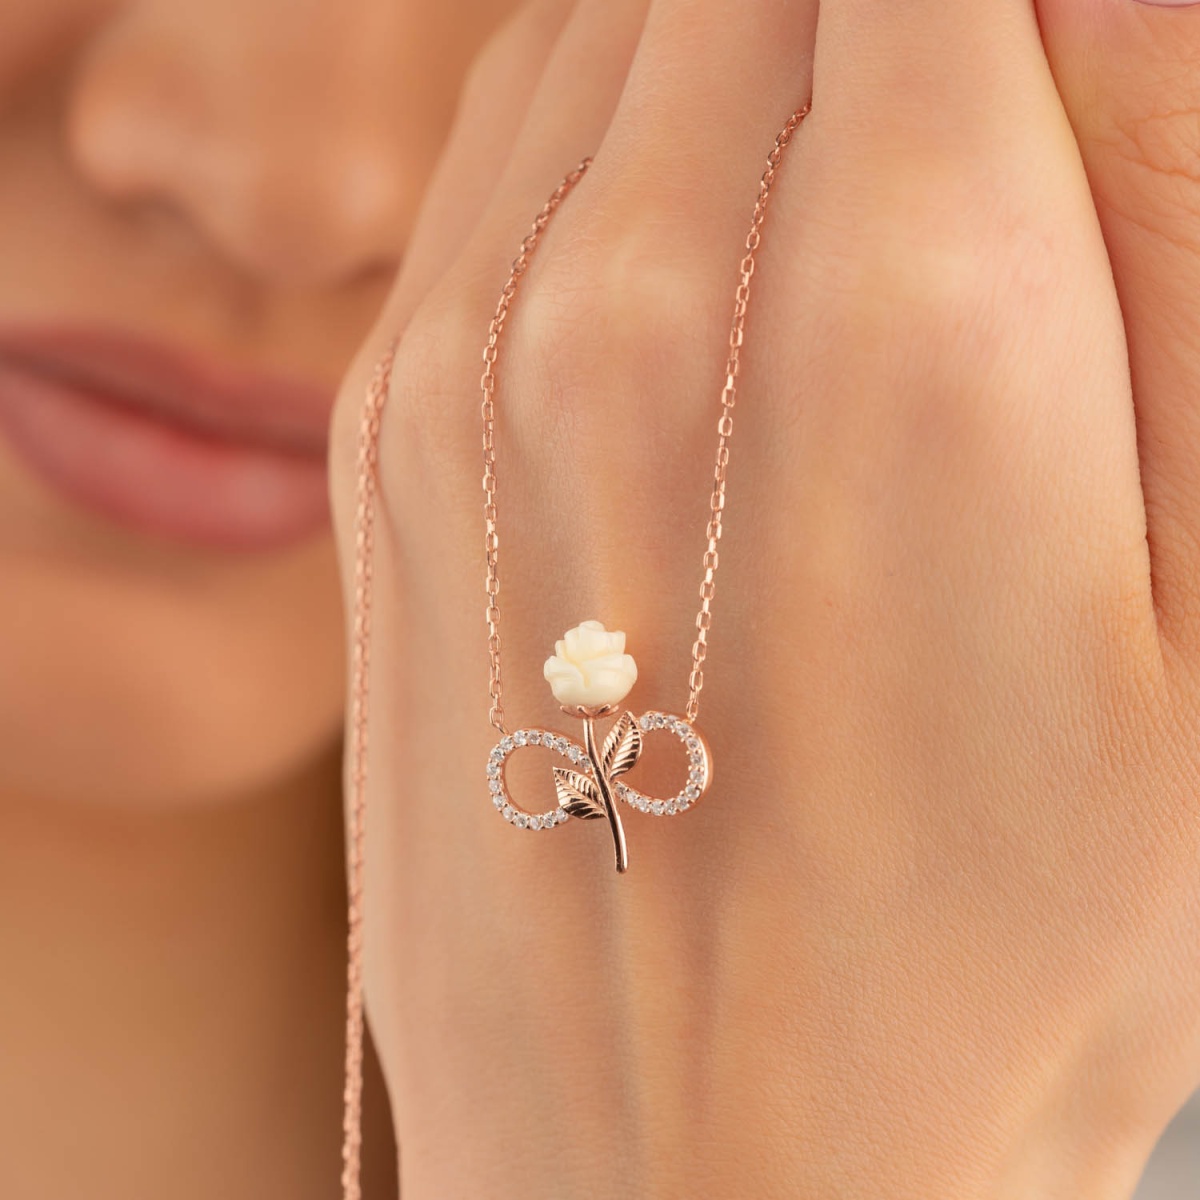 White Rose Infinity Silver Necklace